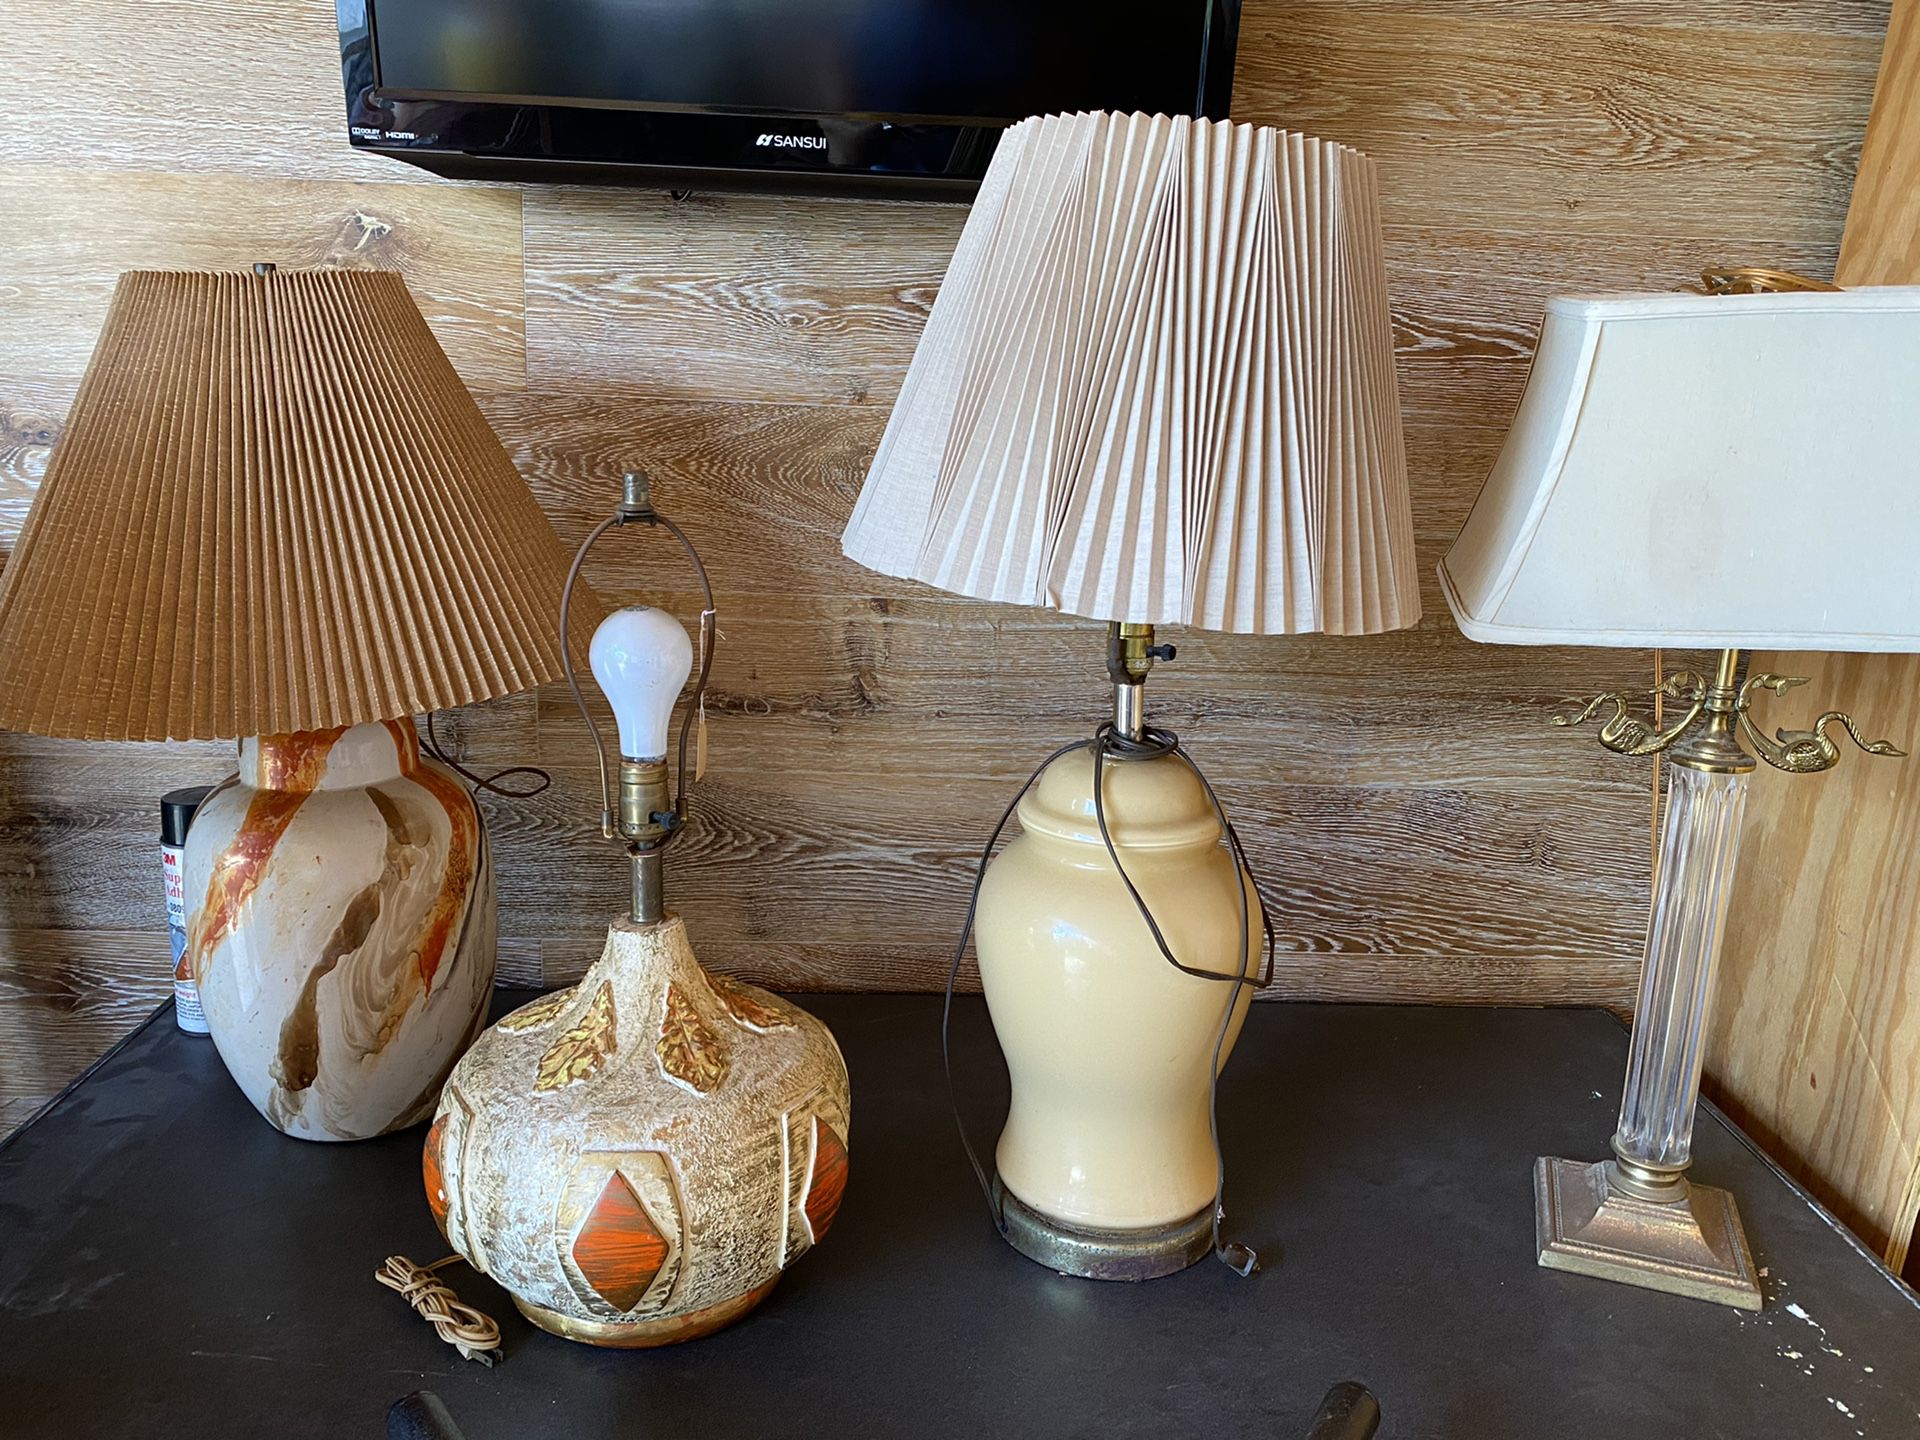 Vintage lamps - $25 all 4